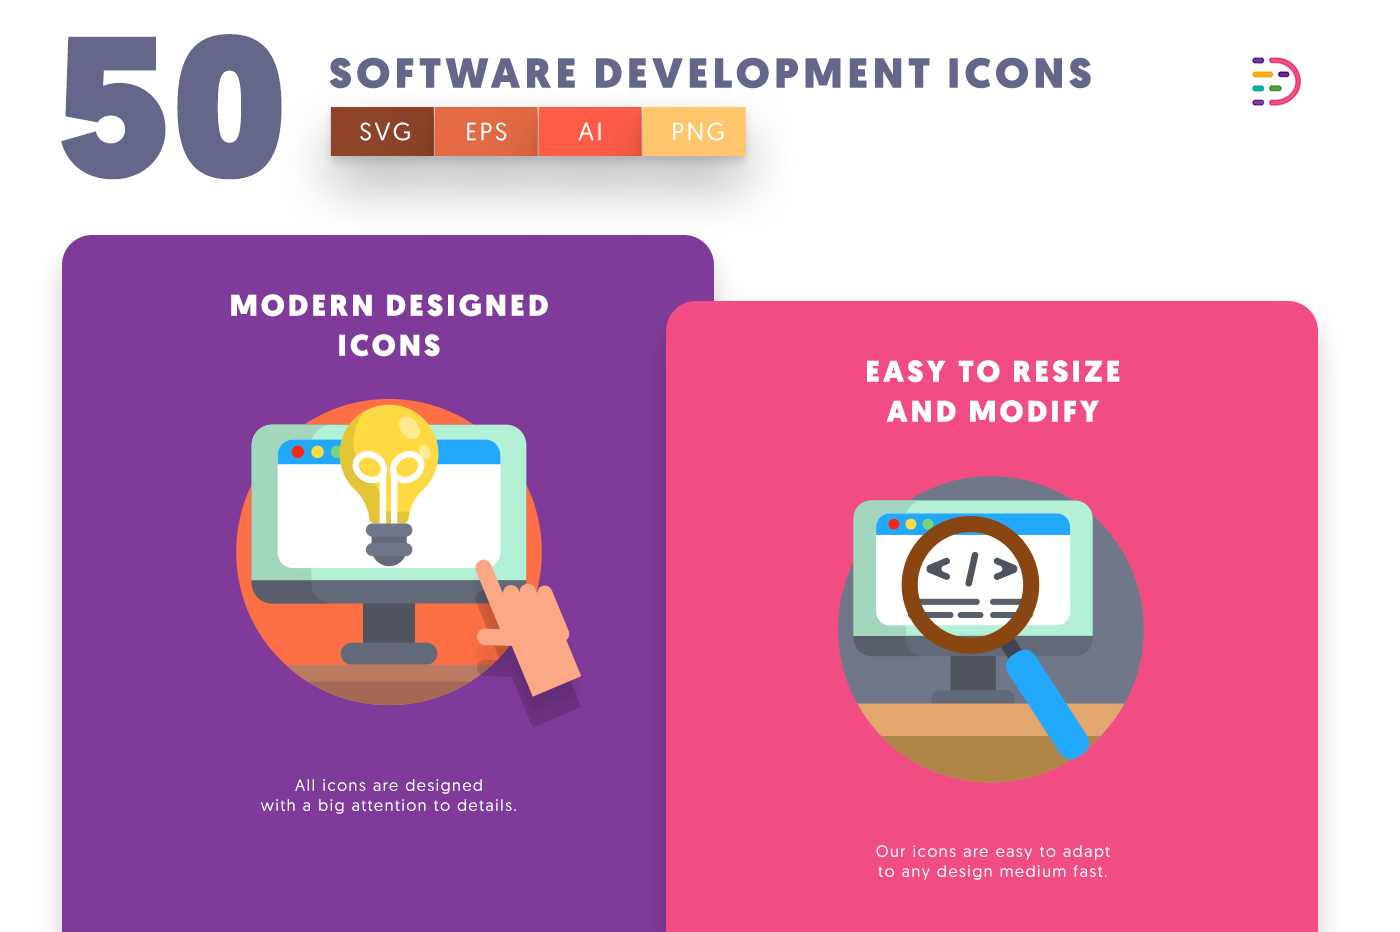 Software Development icons png/svg/eps